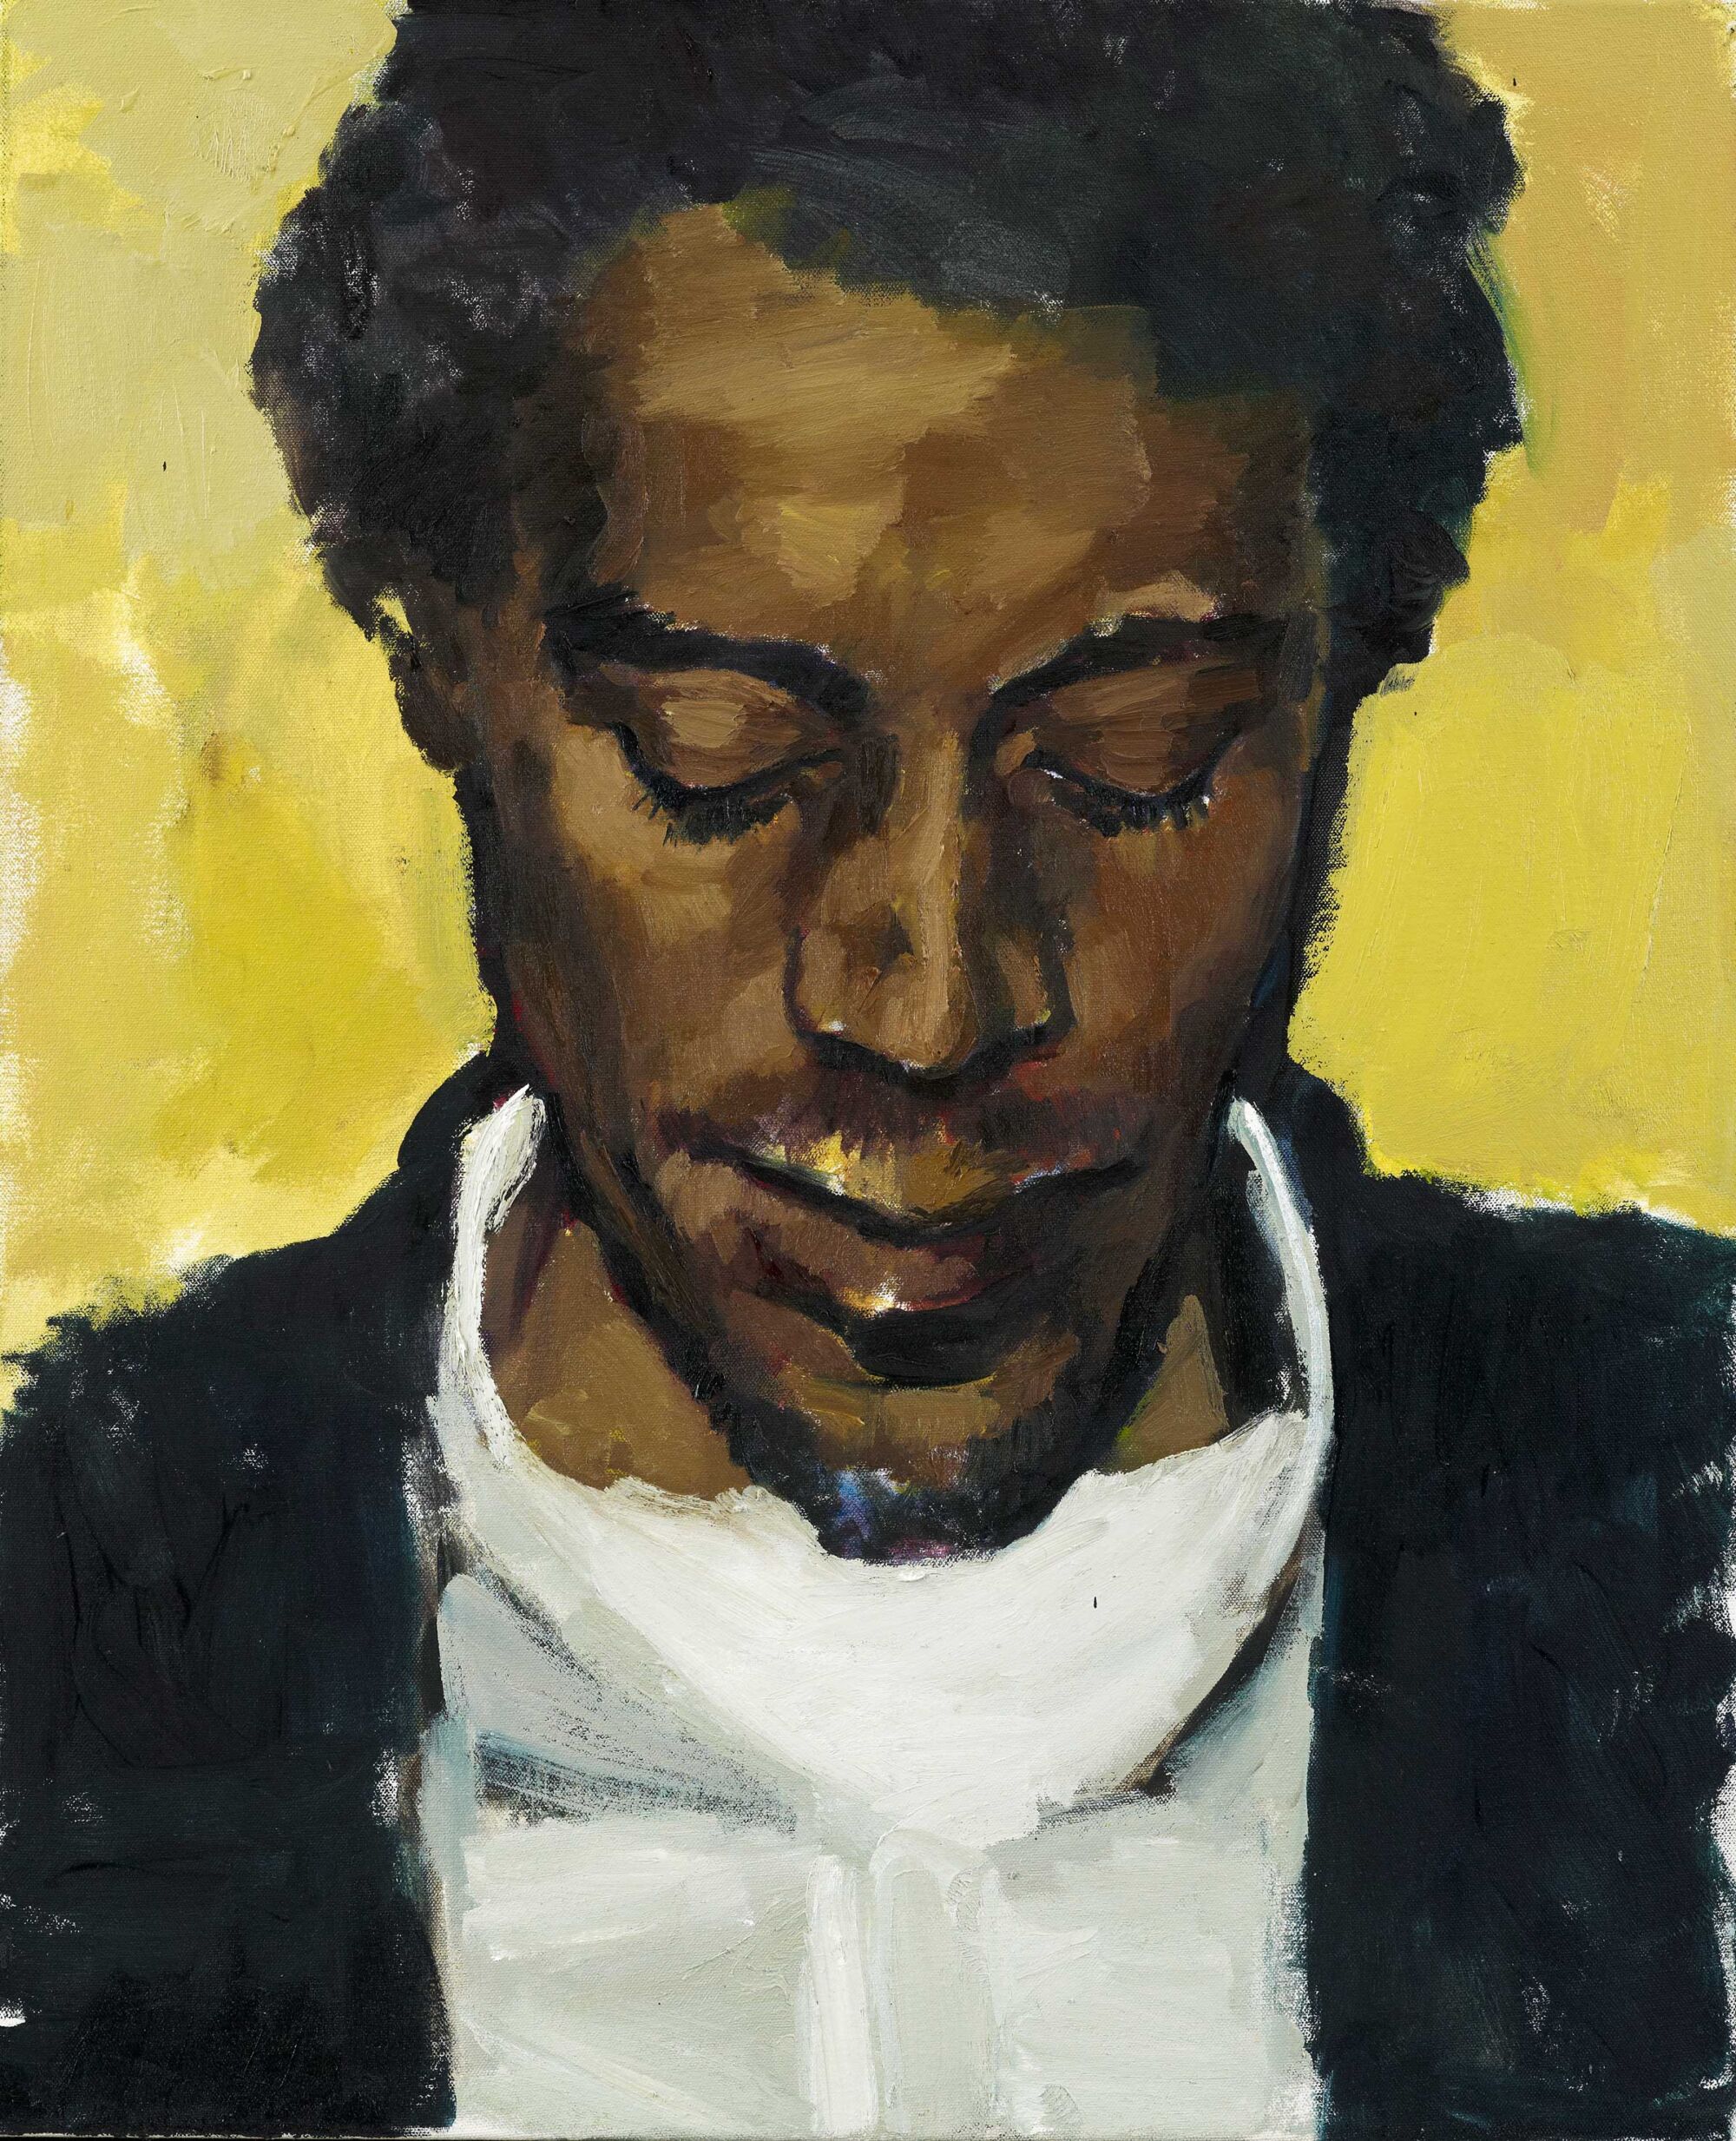 The Wick - Lynette Yiadom-Boakye
Citrine by the Ounce 2014
Private Collection
© Courtesy of Lynette Yiadom-Boakye
